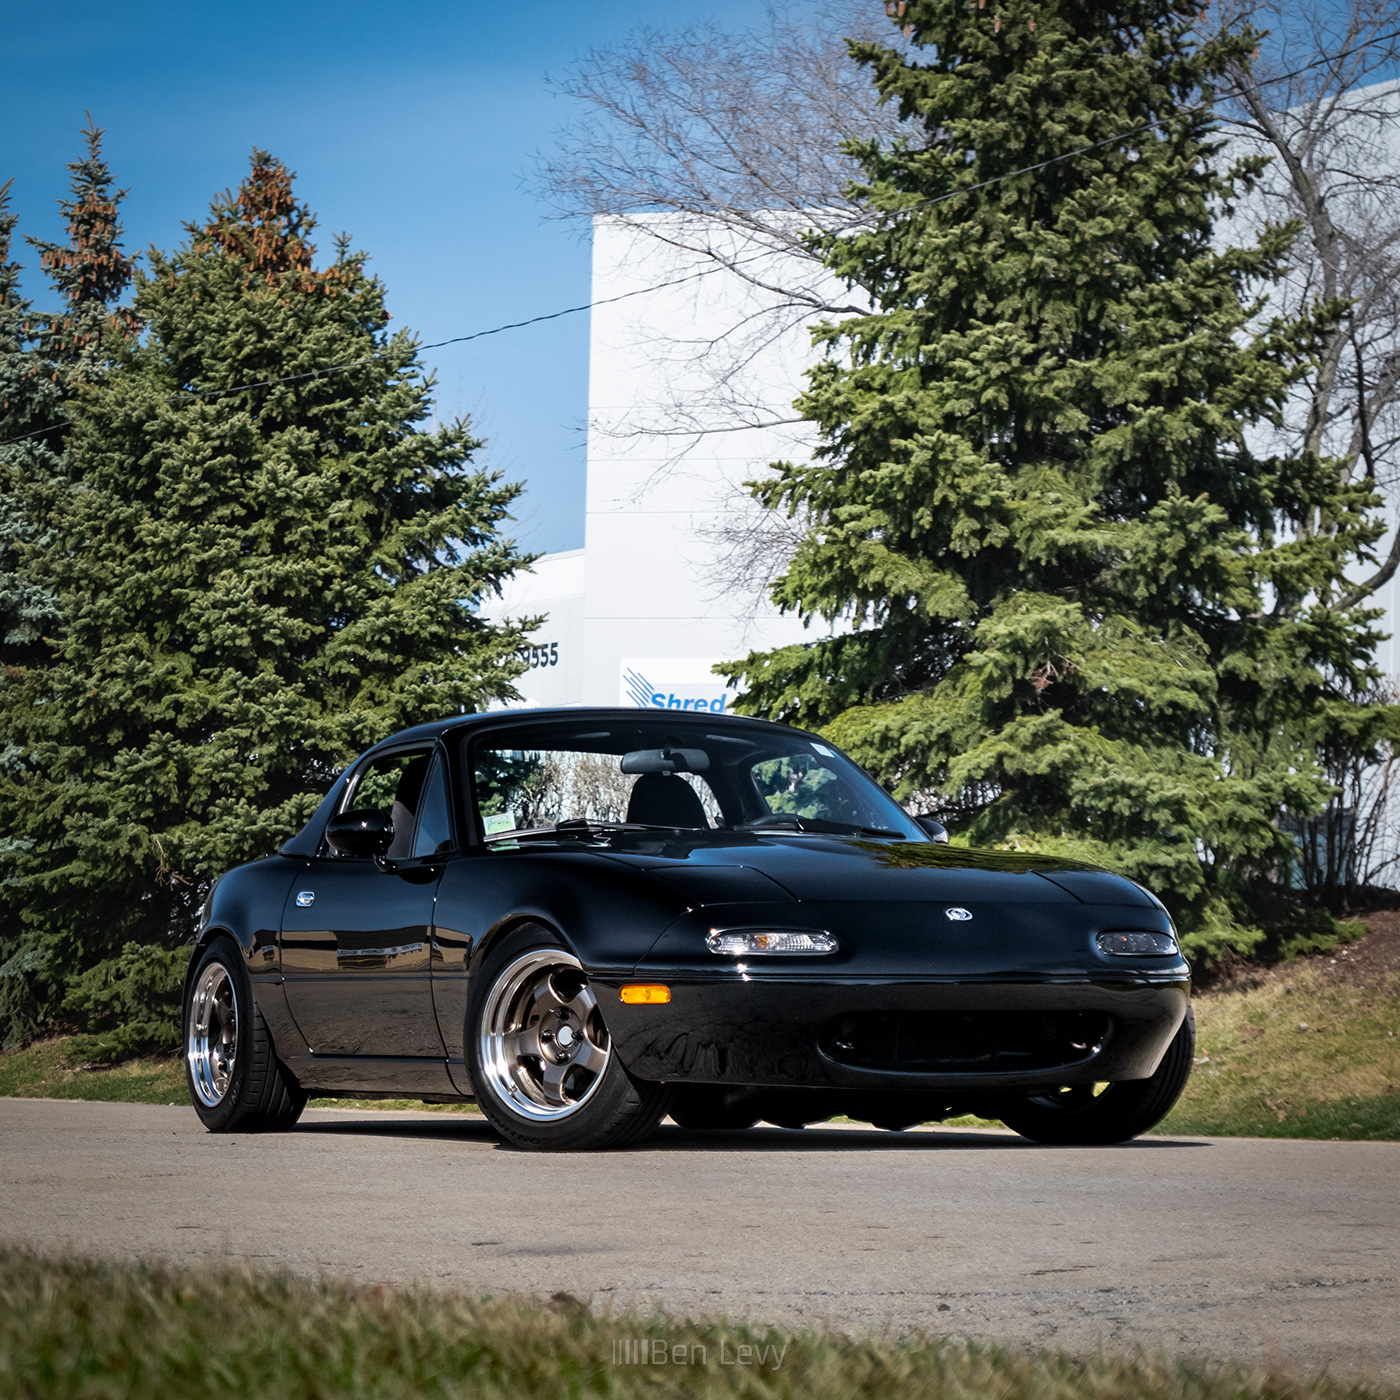 Black Miata with Some Evergreen Trees in the Background